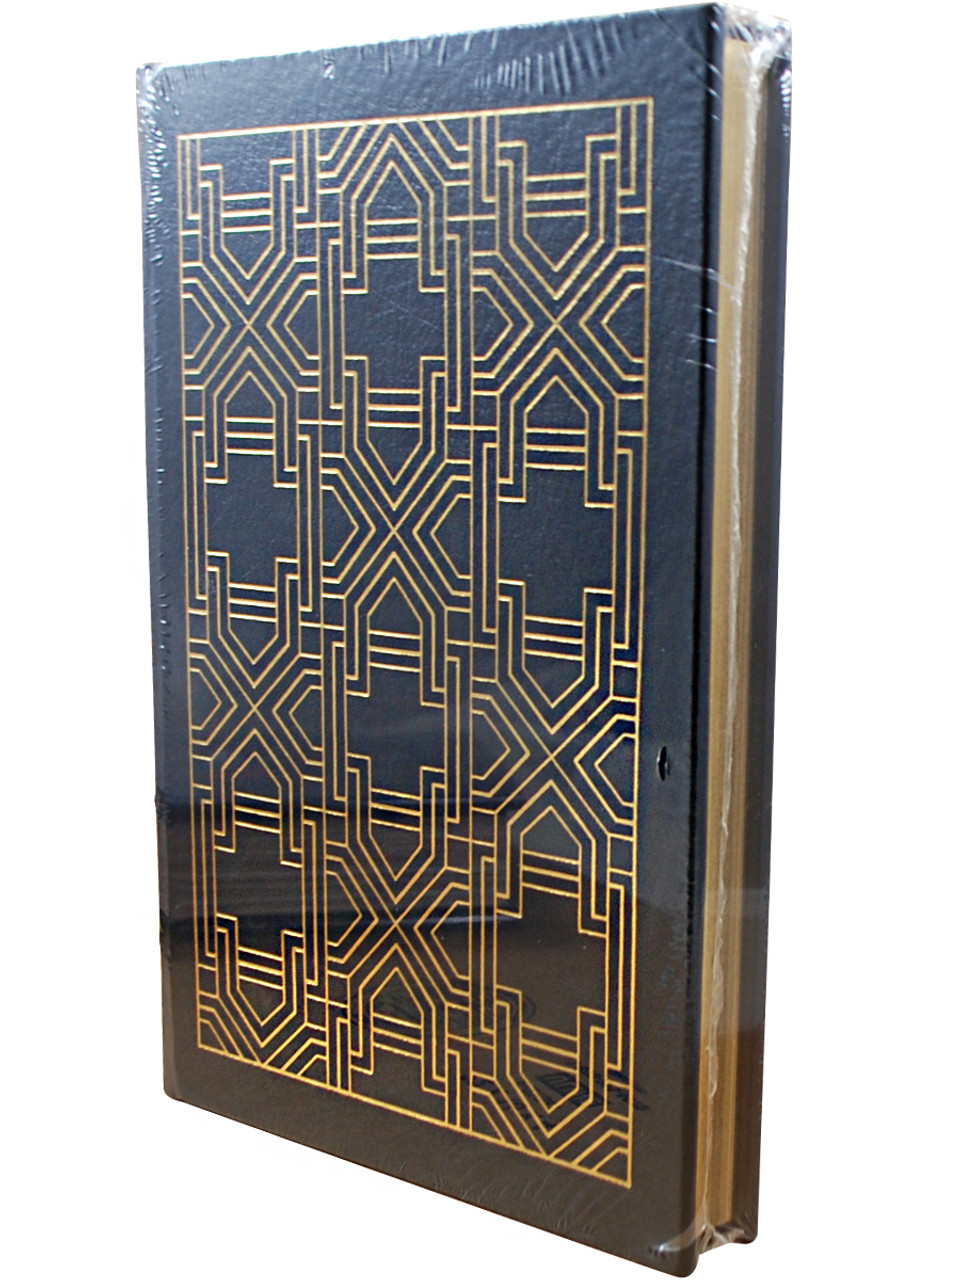 Ursula K. Le Guin "Four Ways To Forgiveness" Signed First Edition, Leather Bound Collector's Edition [Sealed]